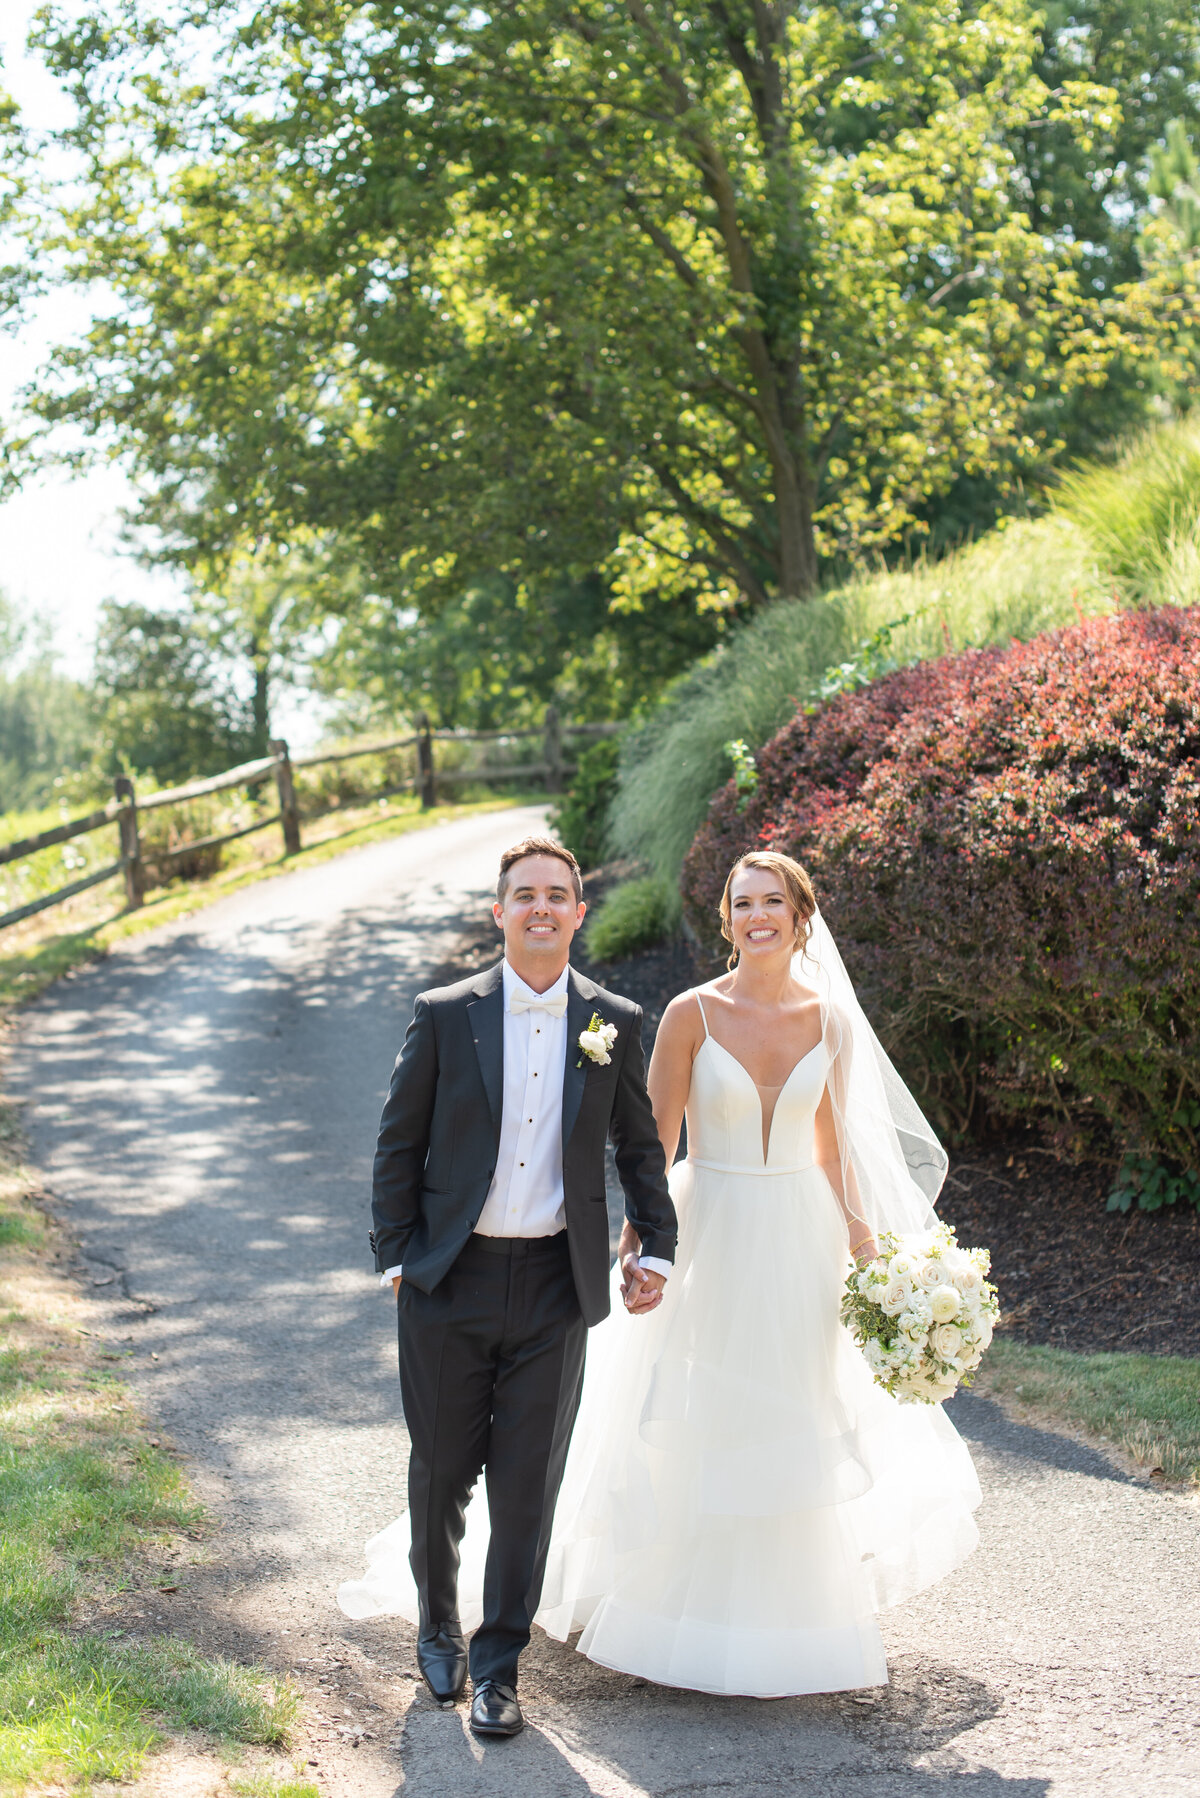 Lindsay and Andrew Wedding Manor at Commonwealth Summer Wedding 5 Star_030